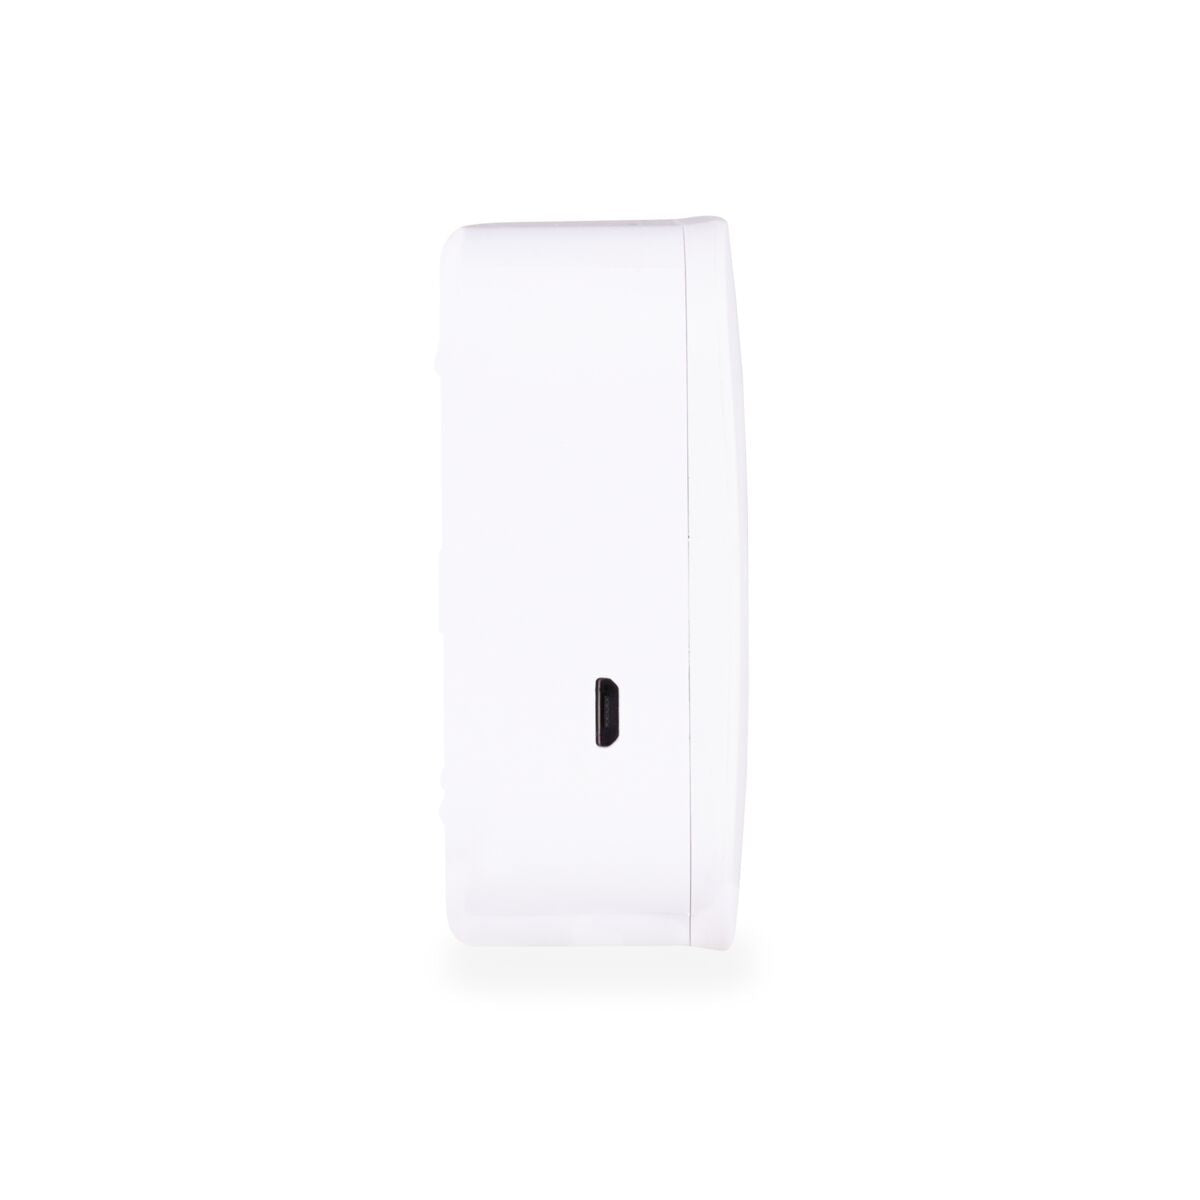 Bell ME WHT - Wireless bell - Chime for Buzz LO - Side View Image with micro USB for Power connection | Marmitek